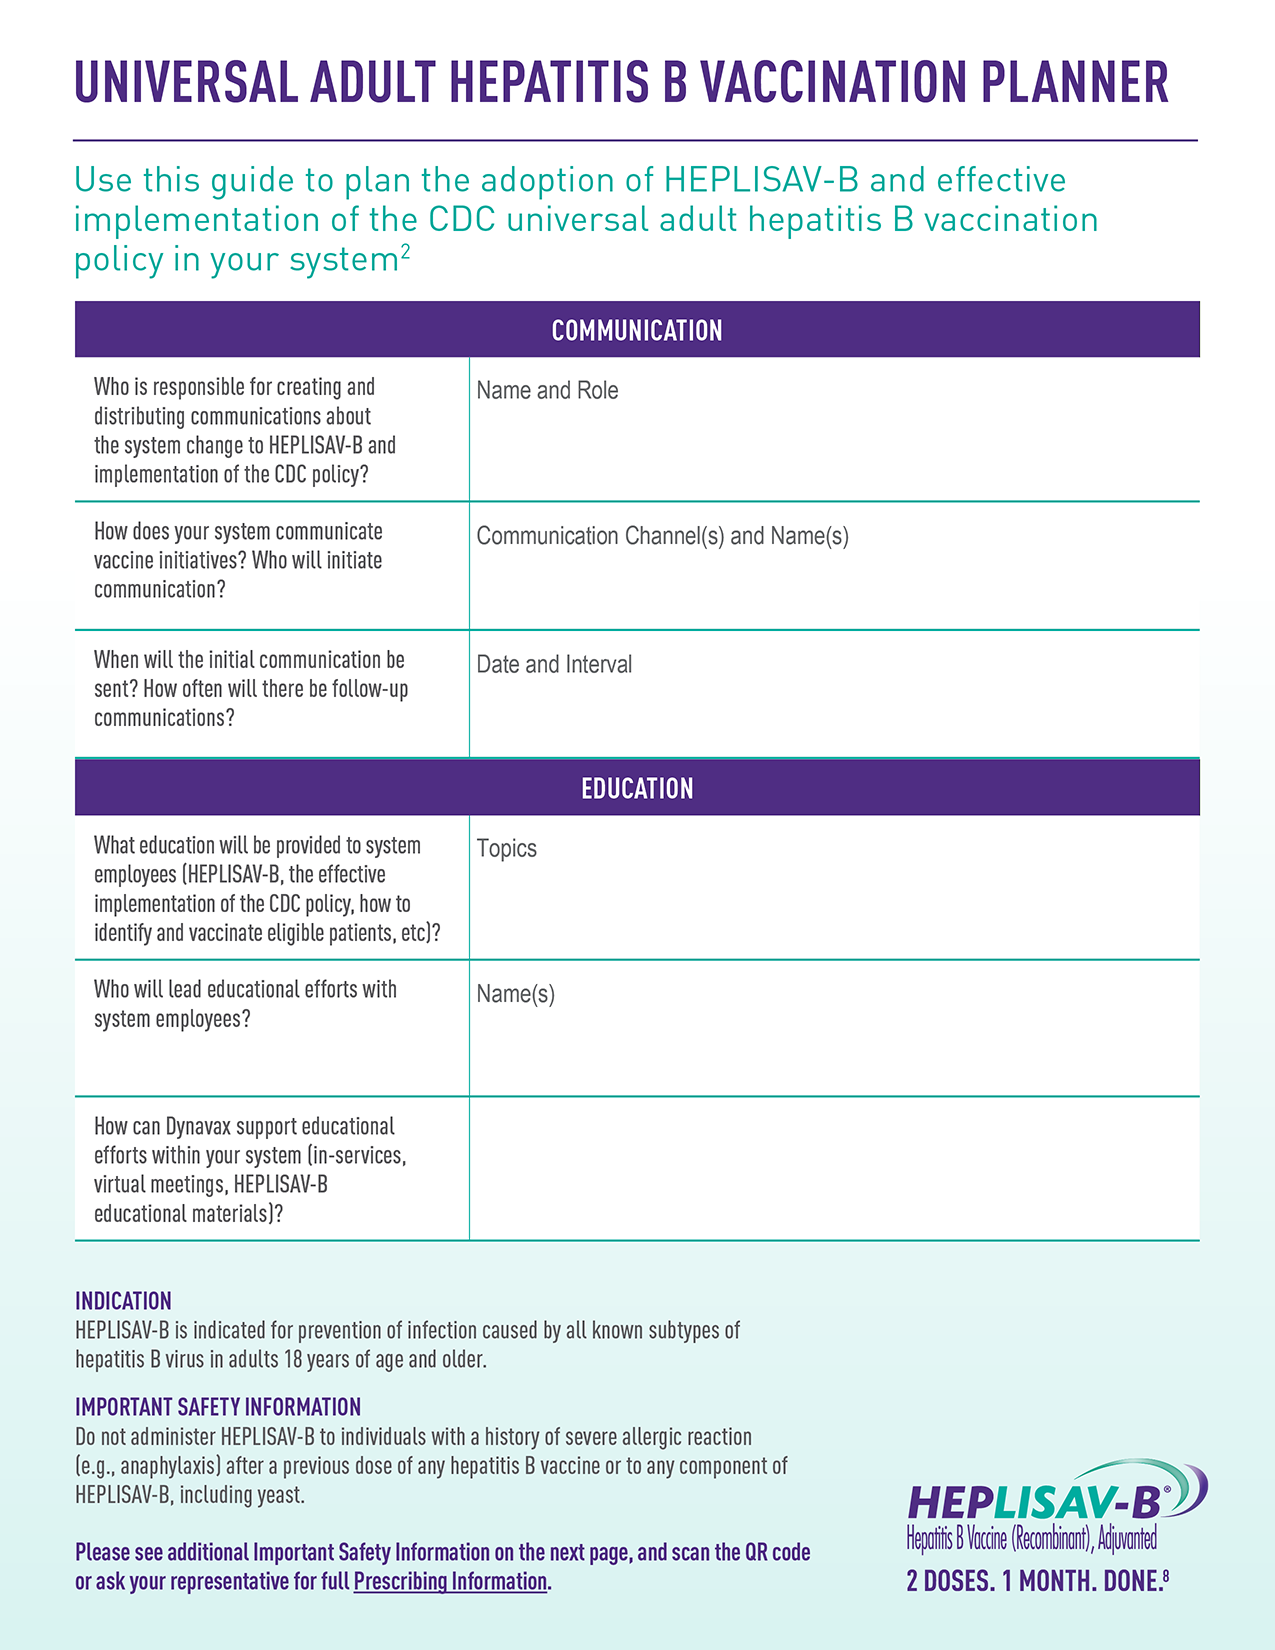 Universal Adult Hepatitis B Vaccination Planner to guide the effective implementation of the CDC policy in your system.